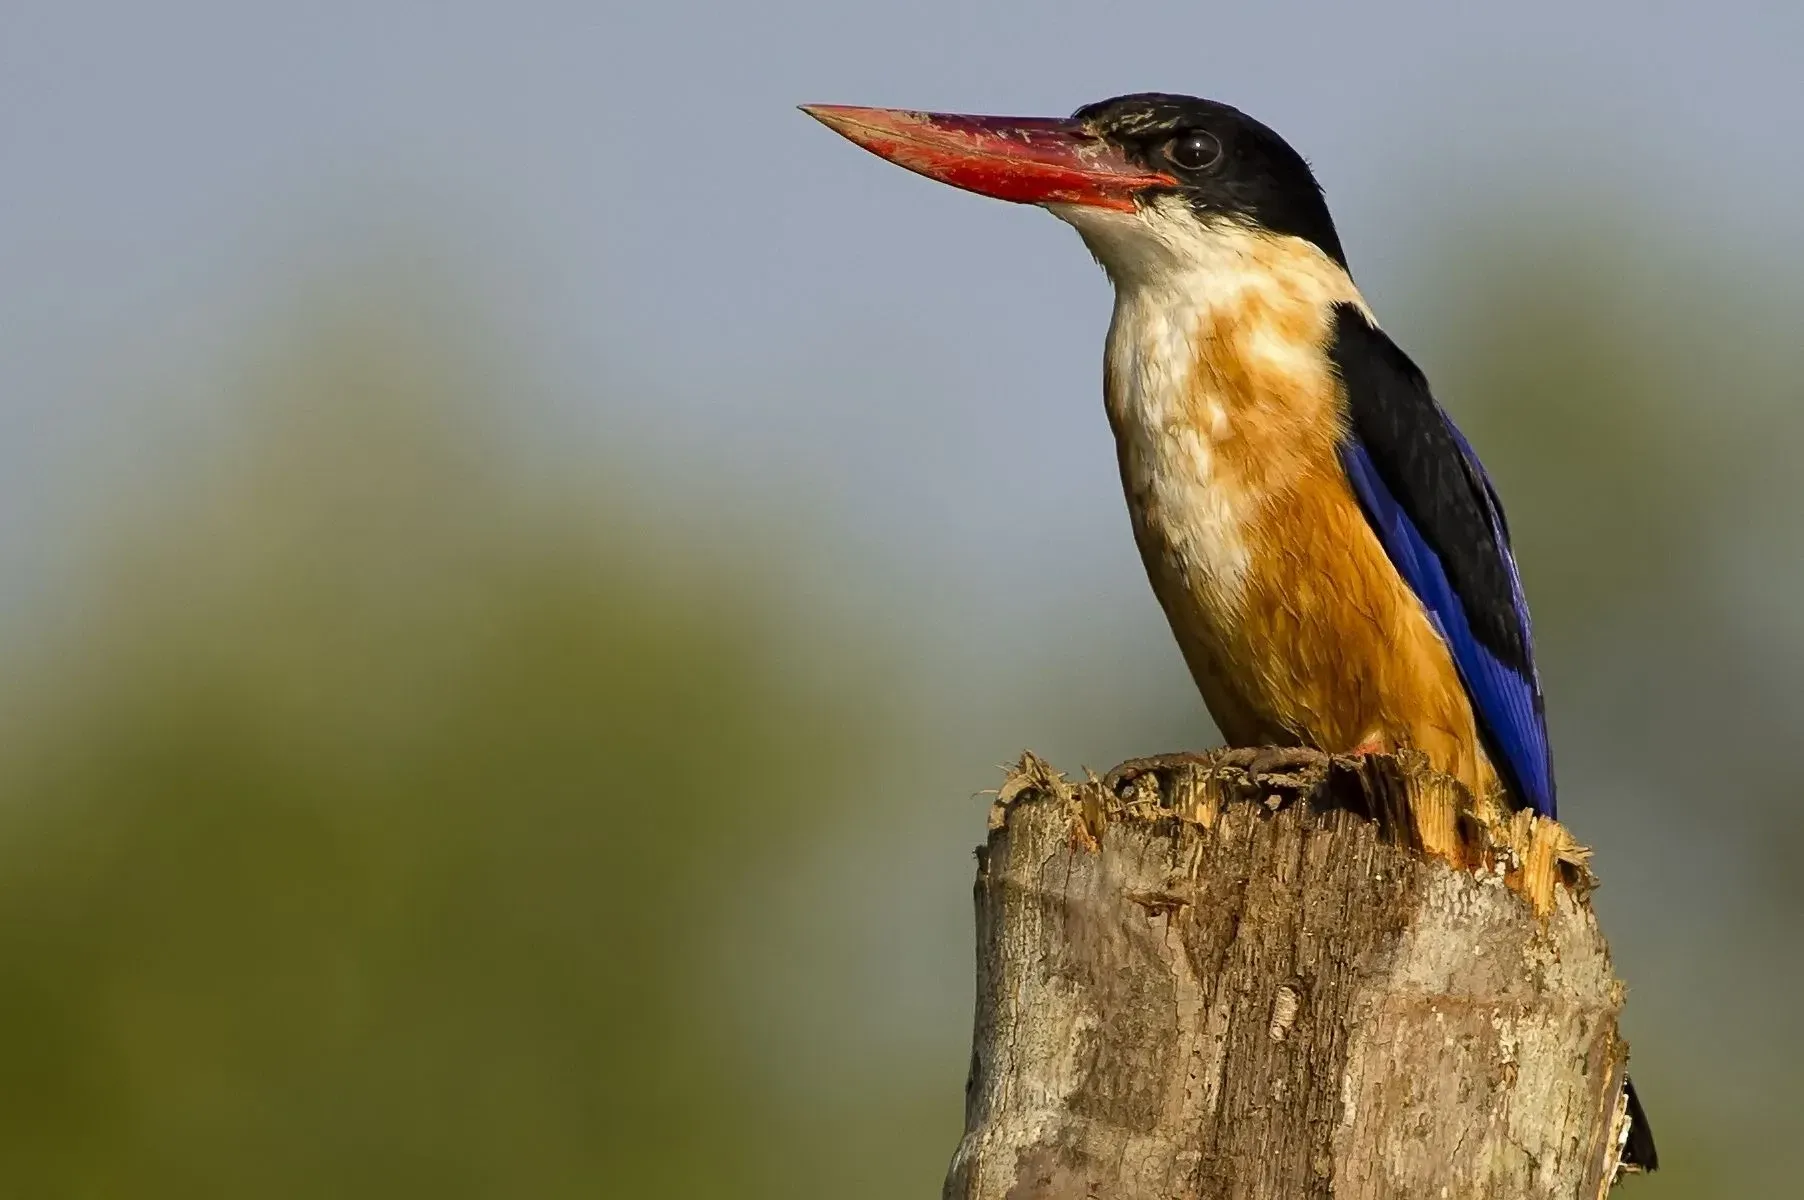 The black-capped kingfisher is predominantly found in Asia.